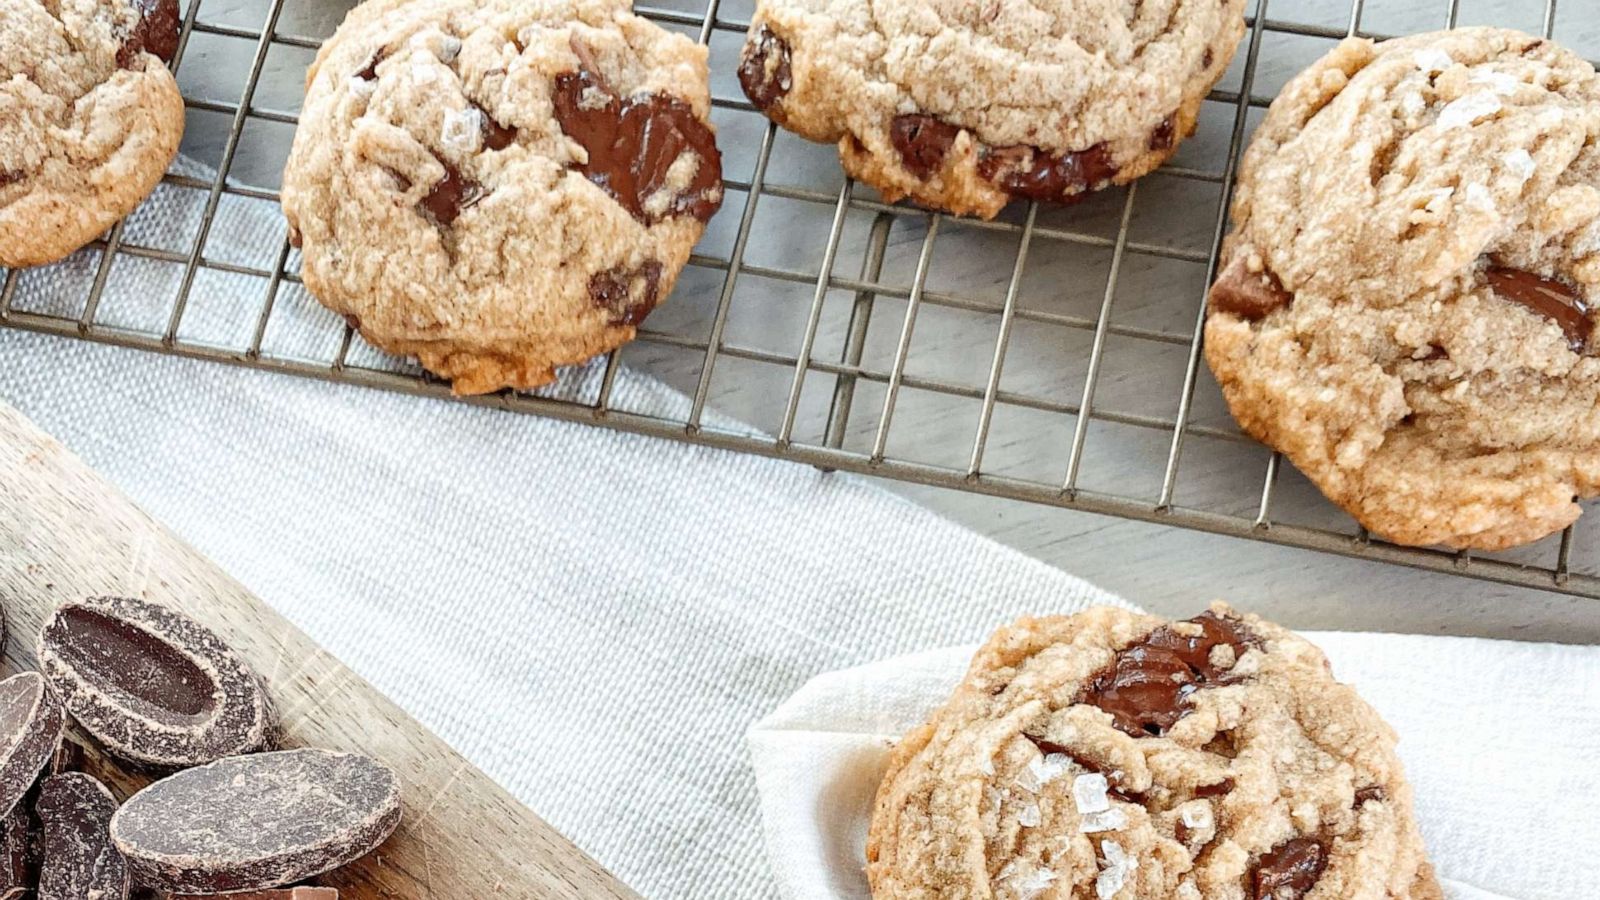 The Secret Step To Baking Cookies With Crinkly Edges